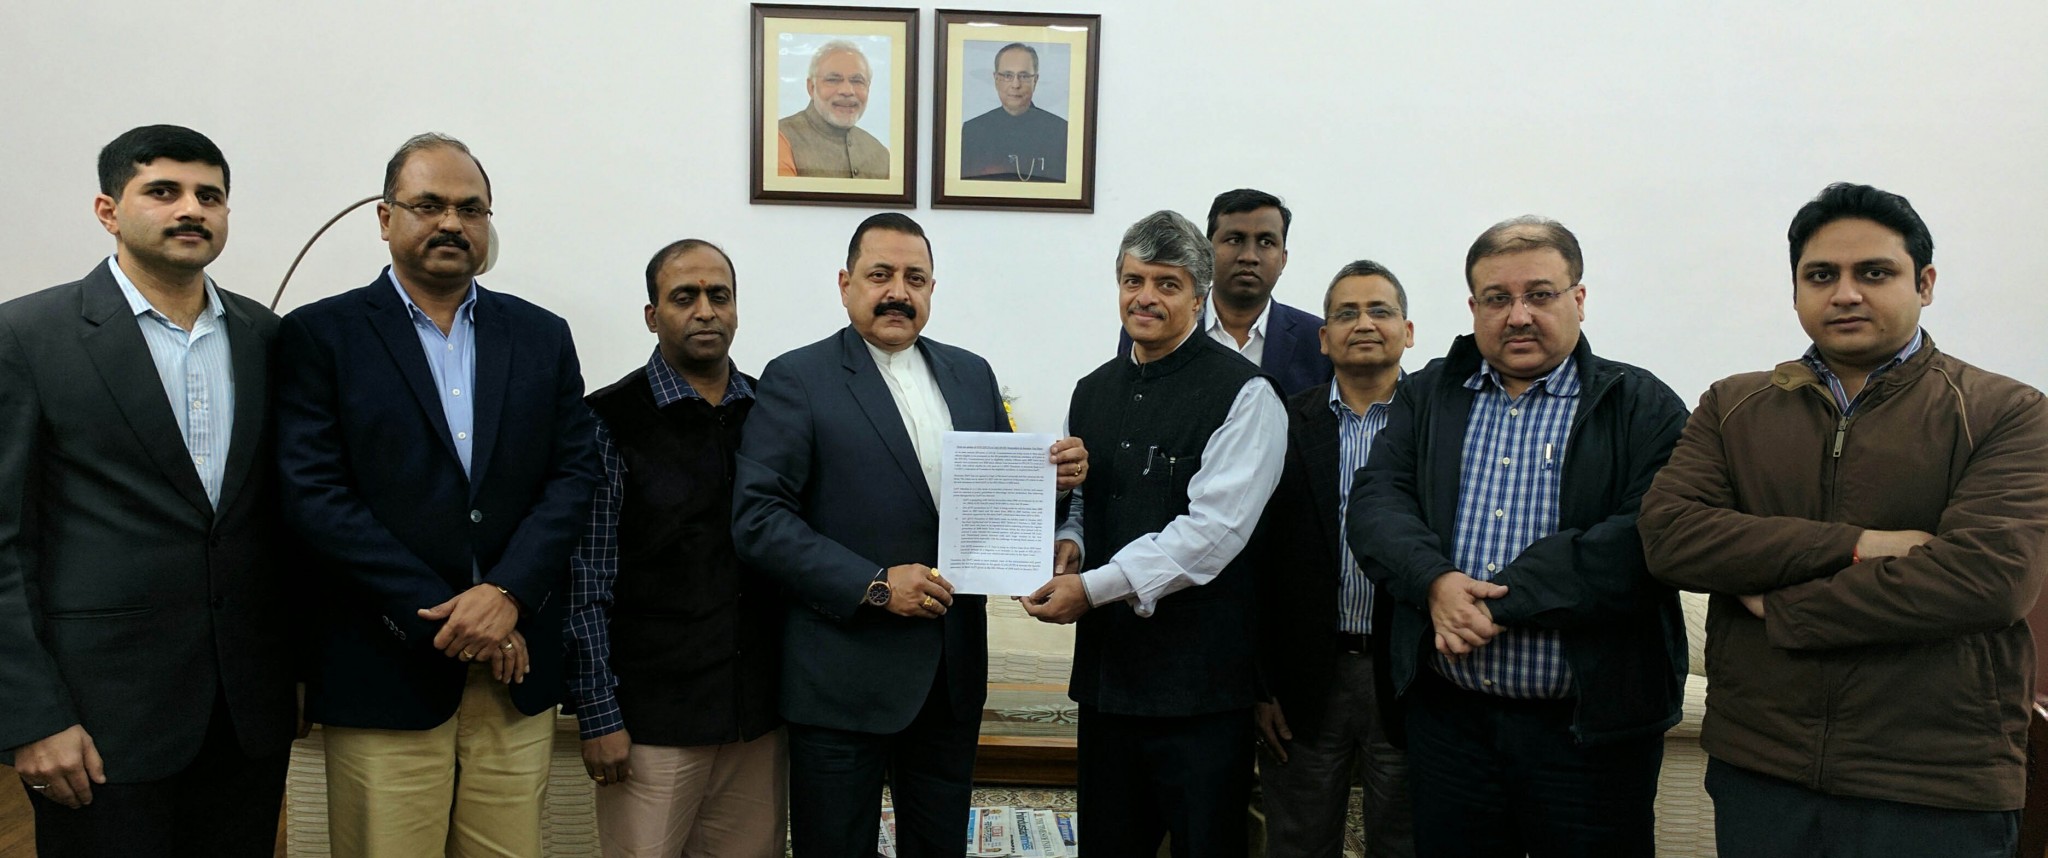 Union Minister Dr Jitendra Singh receiving a memorandum from a delegation of Indian Revenue Service (IRS) officers, at New Delhi.